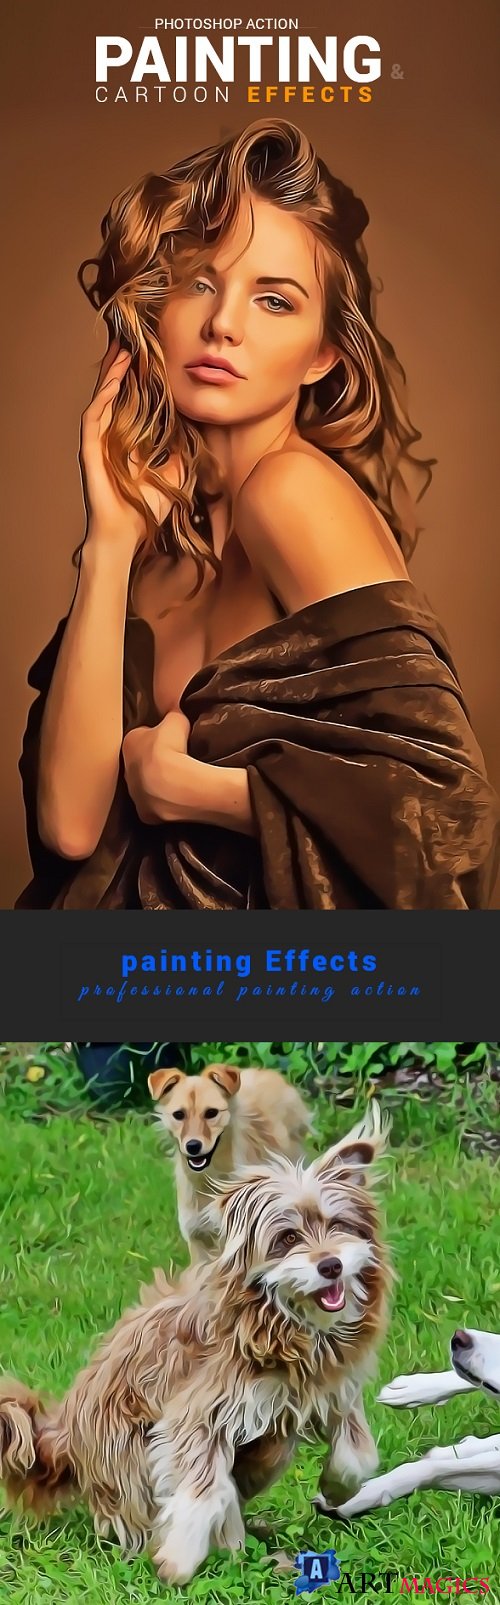 Painting & Cartoon Effects 20865260